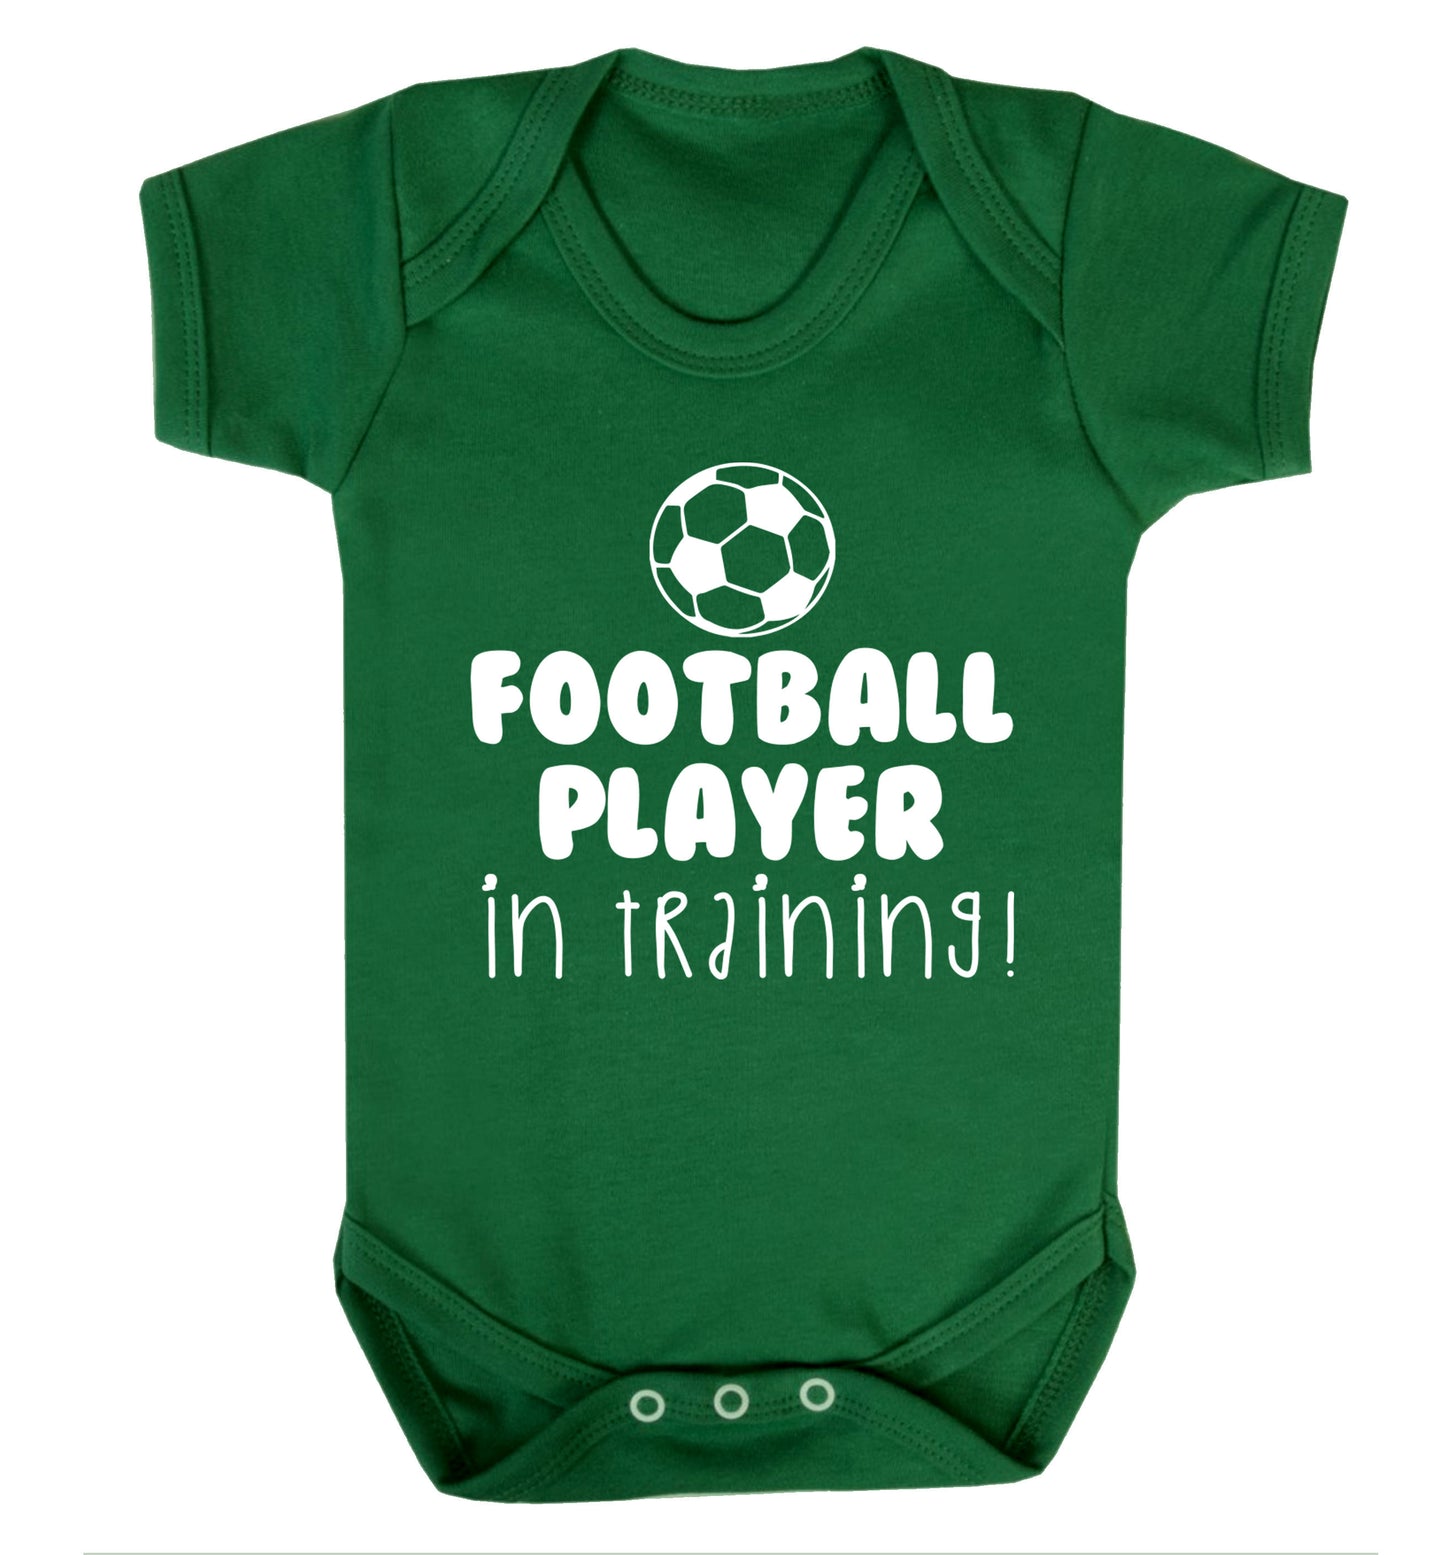 Football player in training Baby Vest green 18-24 months